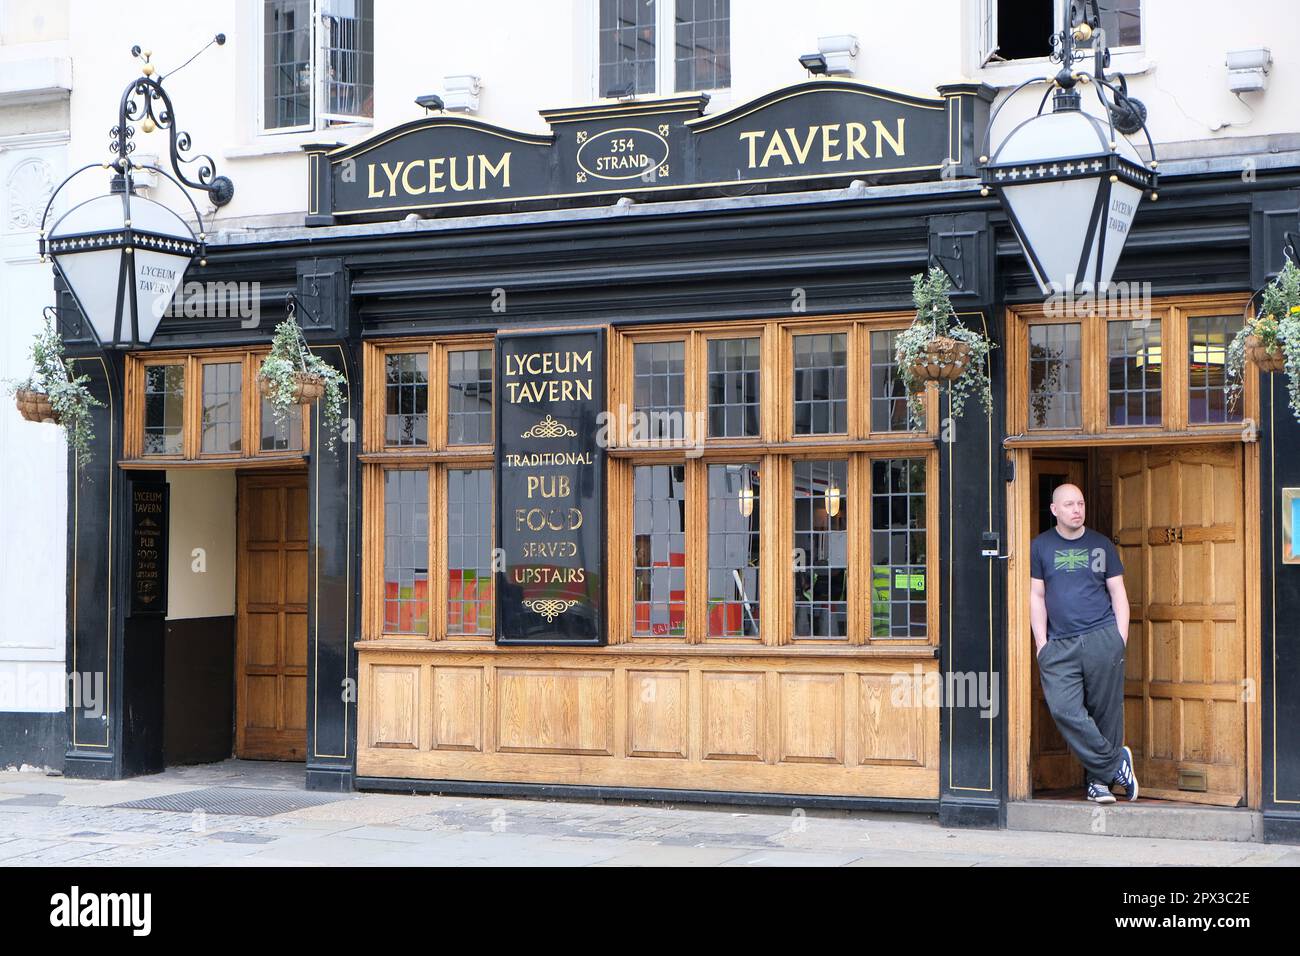 London, UK. The man wearing a Union Jack t-shirt leans on the door frame at the front of the Lyceum Tavern in the Strand. Stock Photo